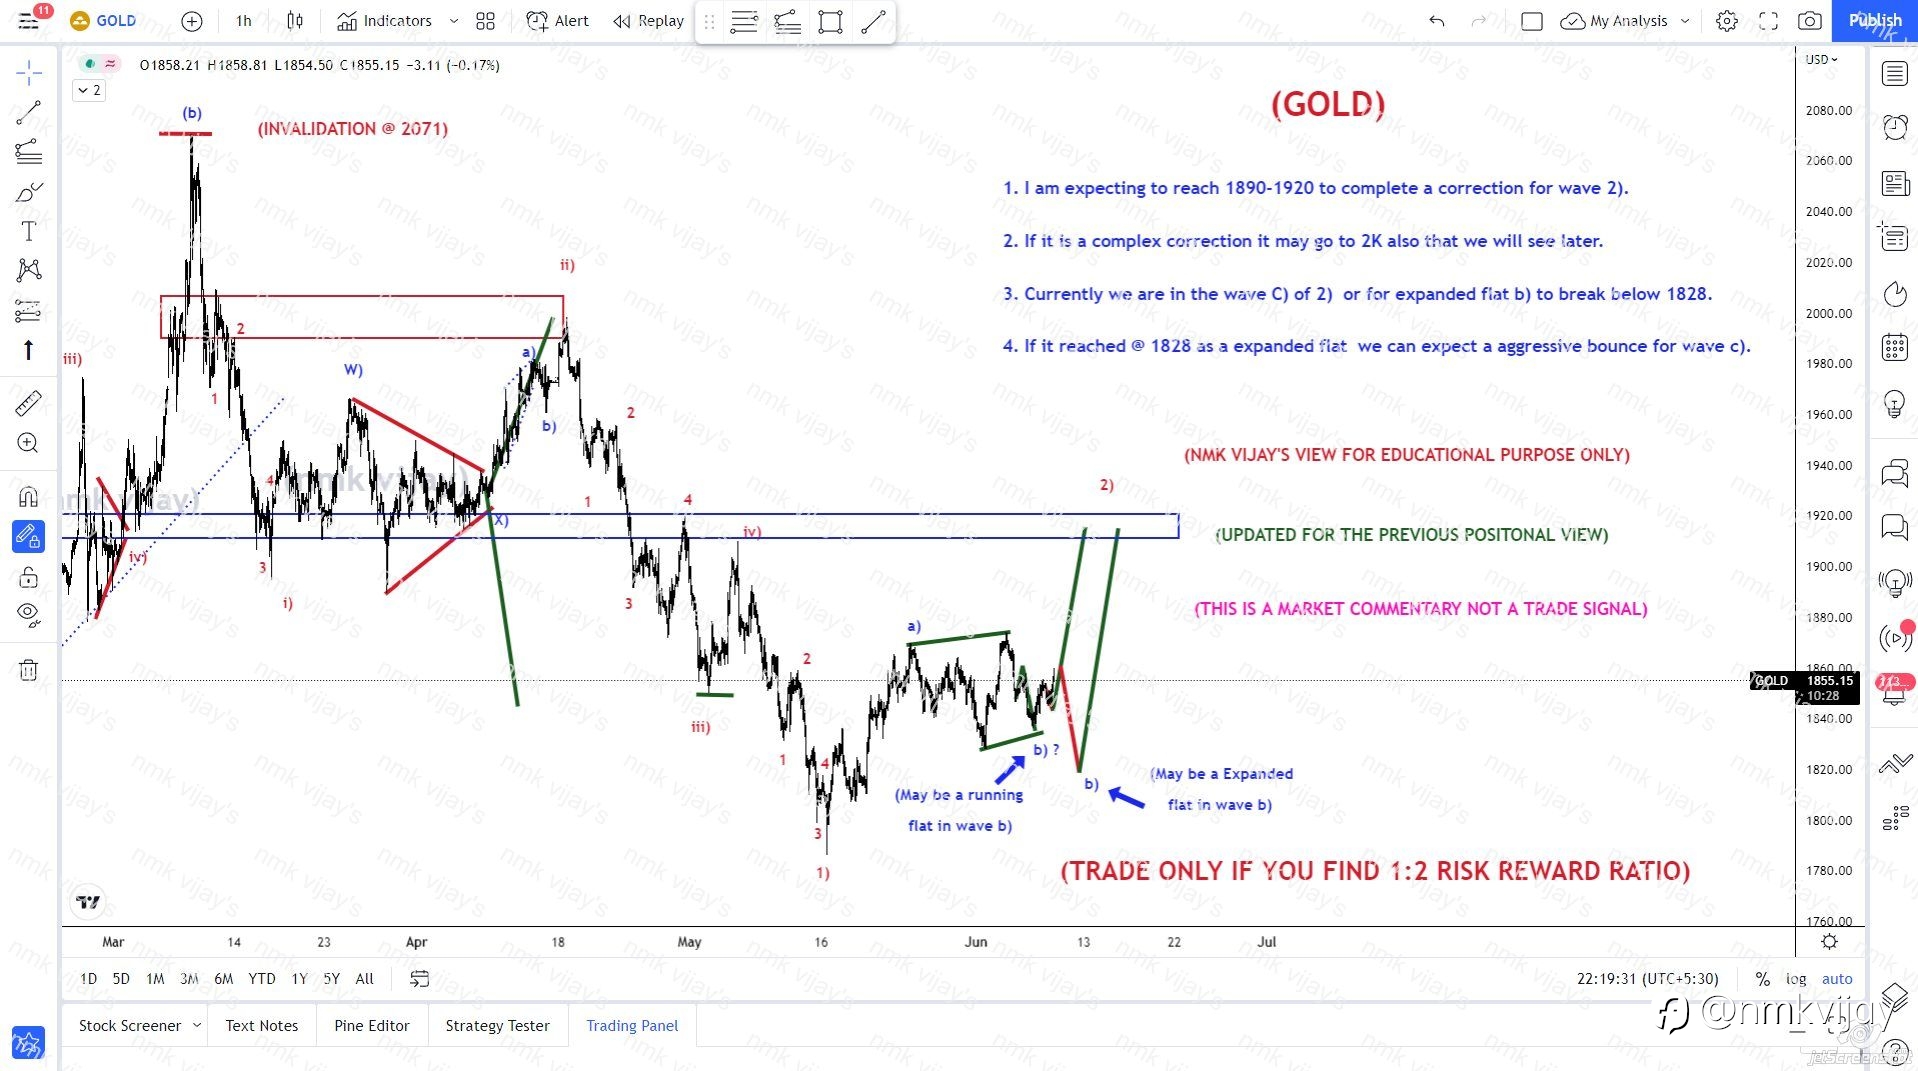 GOLD-Expecting to complete a 3 wave structure for 2) to 1920